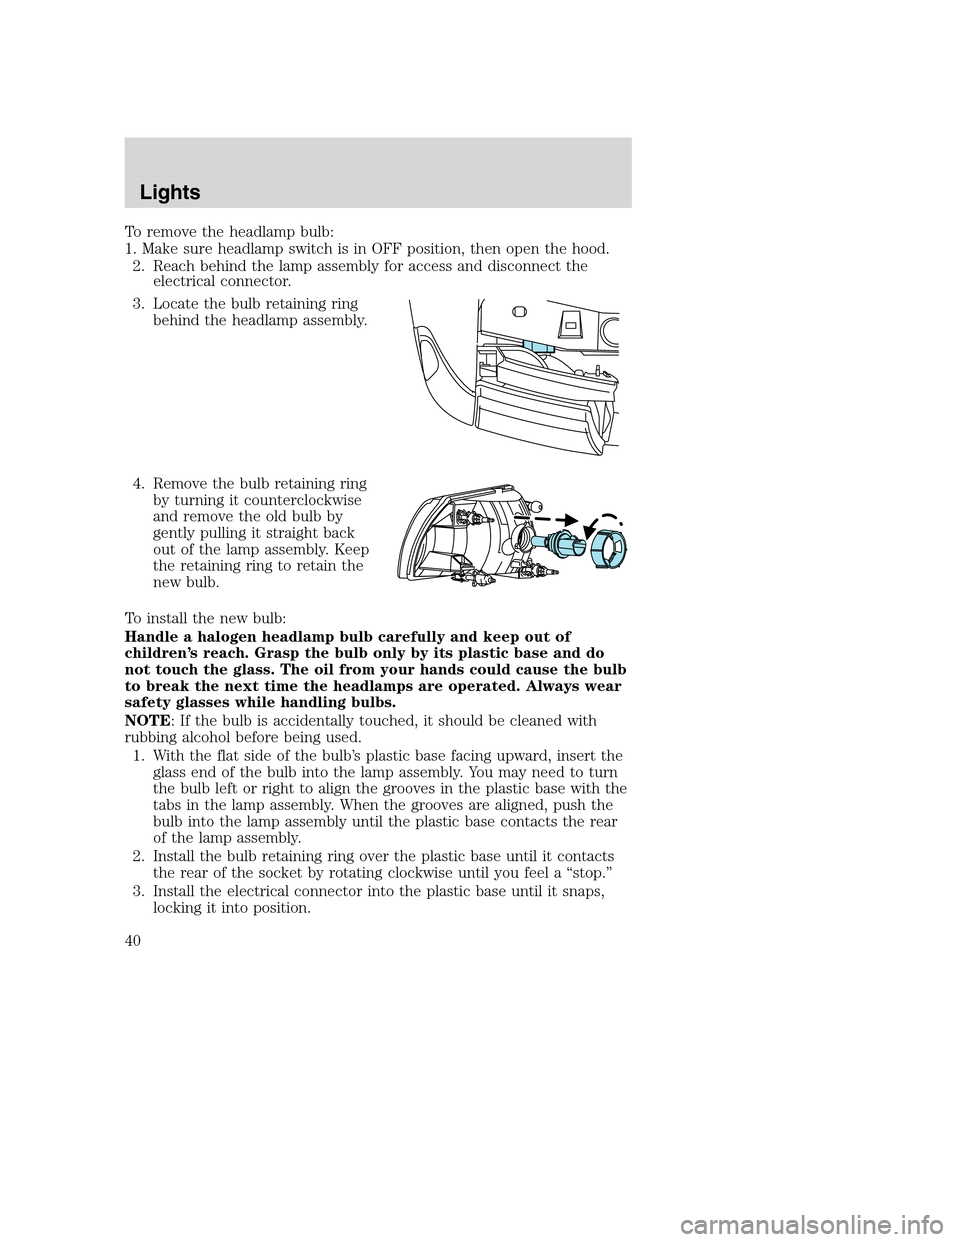 MAZDA MODEL B-SERIES 2005  Owners Manual (in English) To remove the headlamp bulb:
1. Make sure headlamp switch is in OFF position, then open the hood.
2. Reach behind the lamp assembly for access and disconnect the
electrical connector.
3. Locate the bu